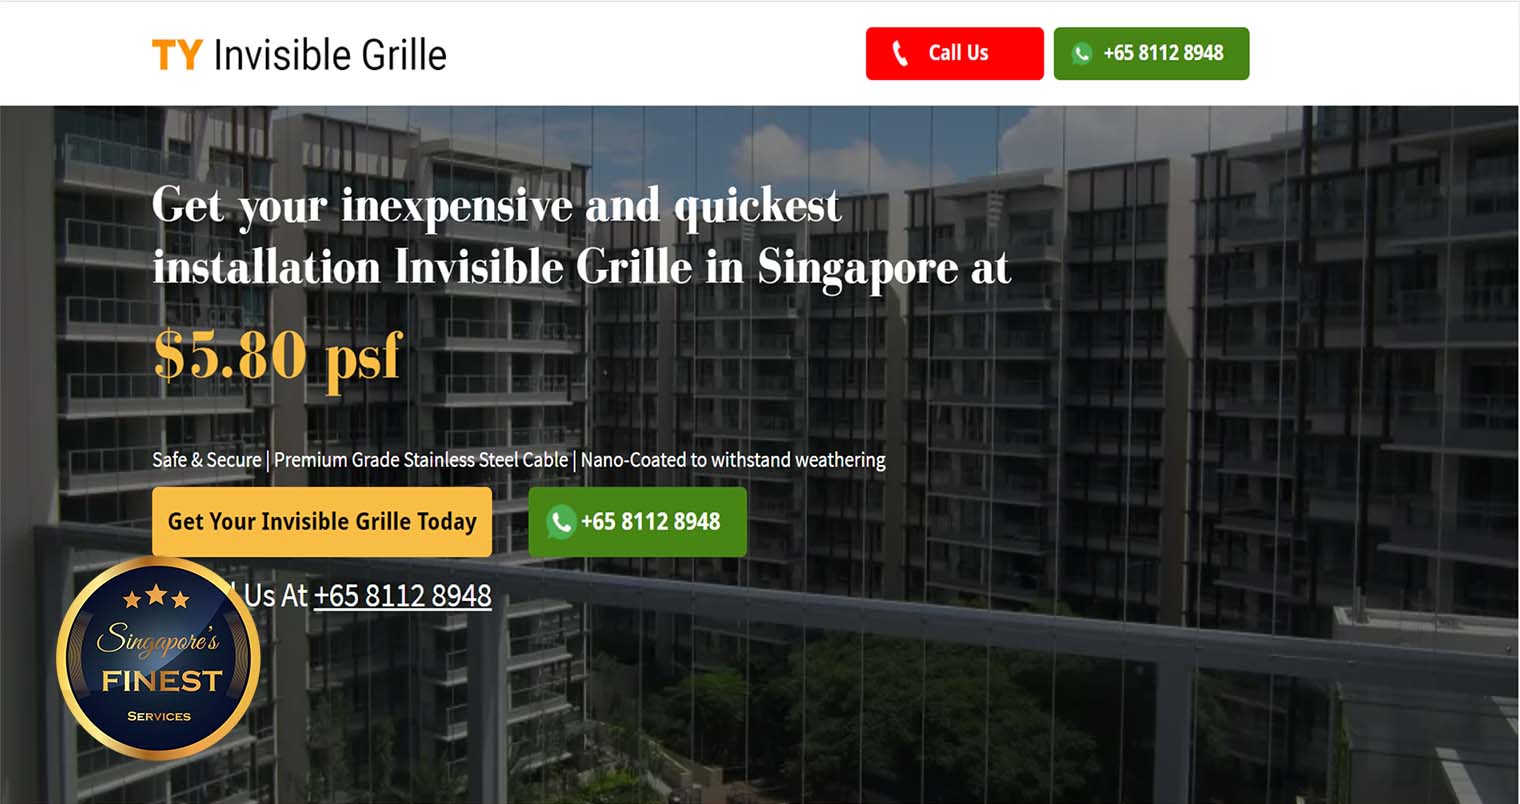 TY Invisible Grille - Invisible Grille Singapore